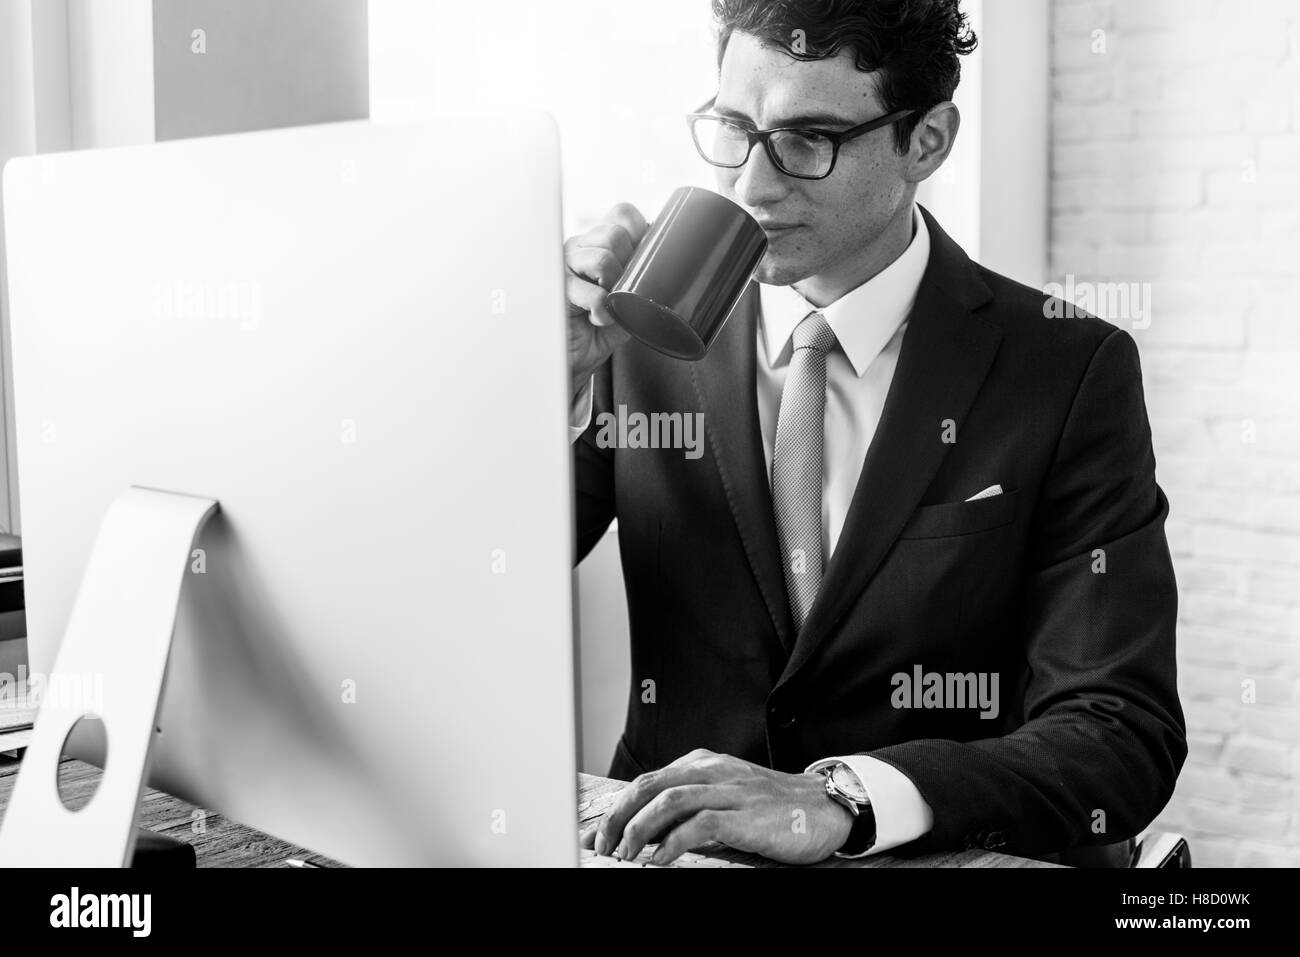 Business Man Drinking Coffee Office Concept Stock Photo